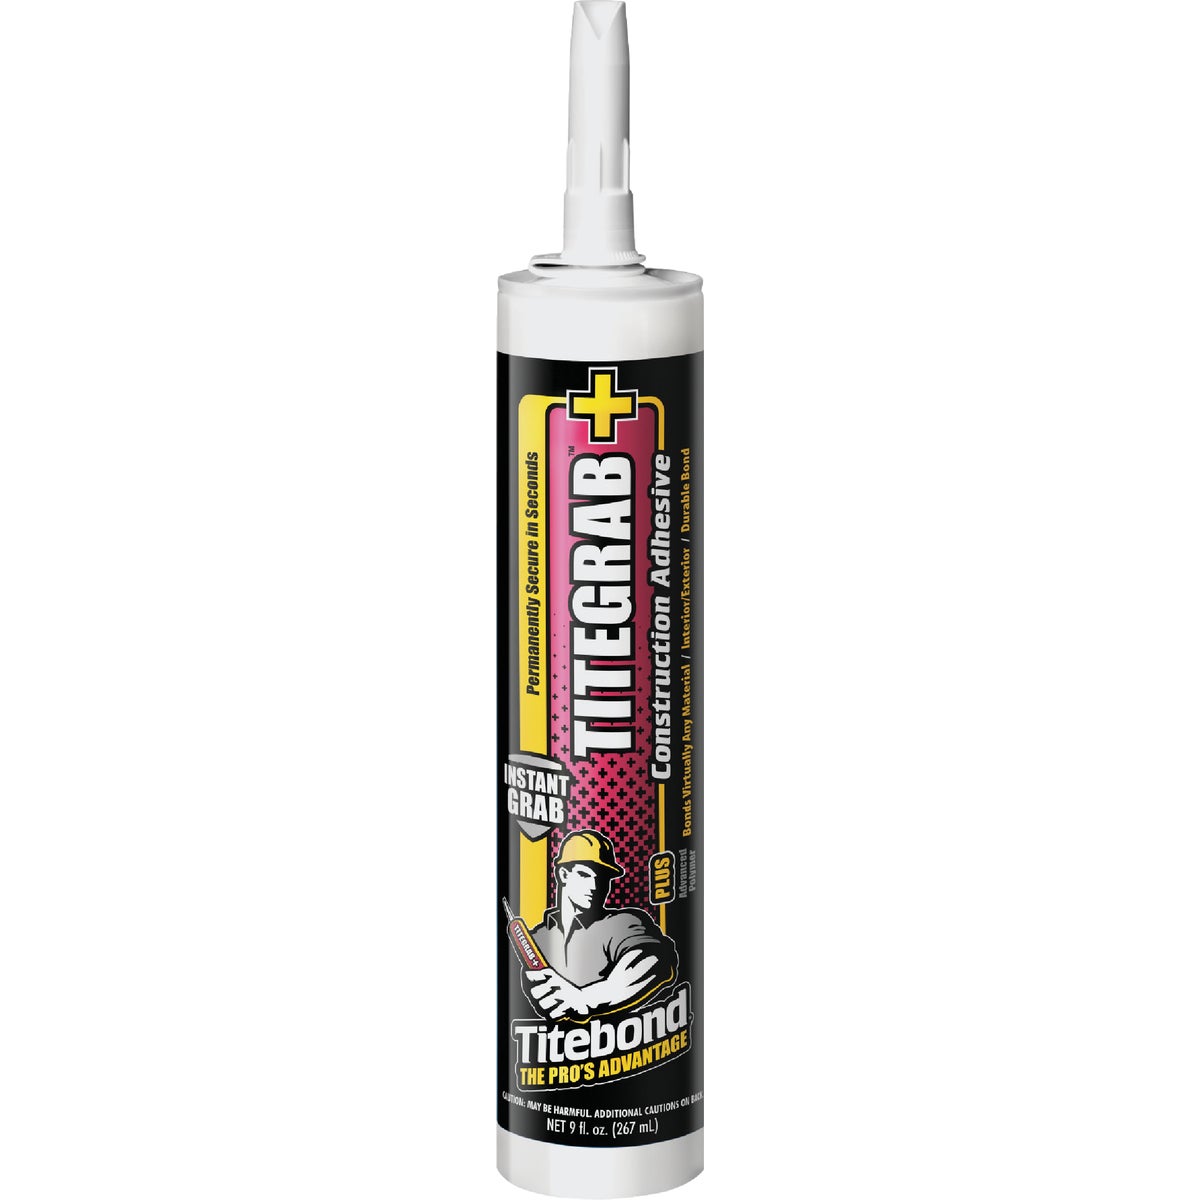 Item 772574, TiteGrab adhesive is an advanced polymer formula specifically designed to 